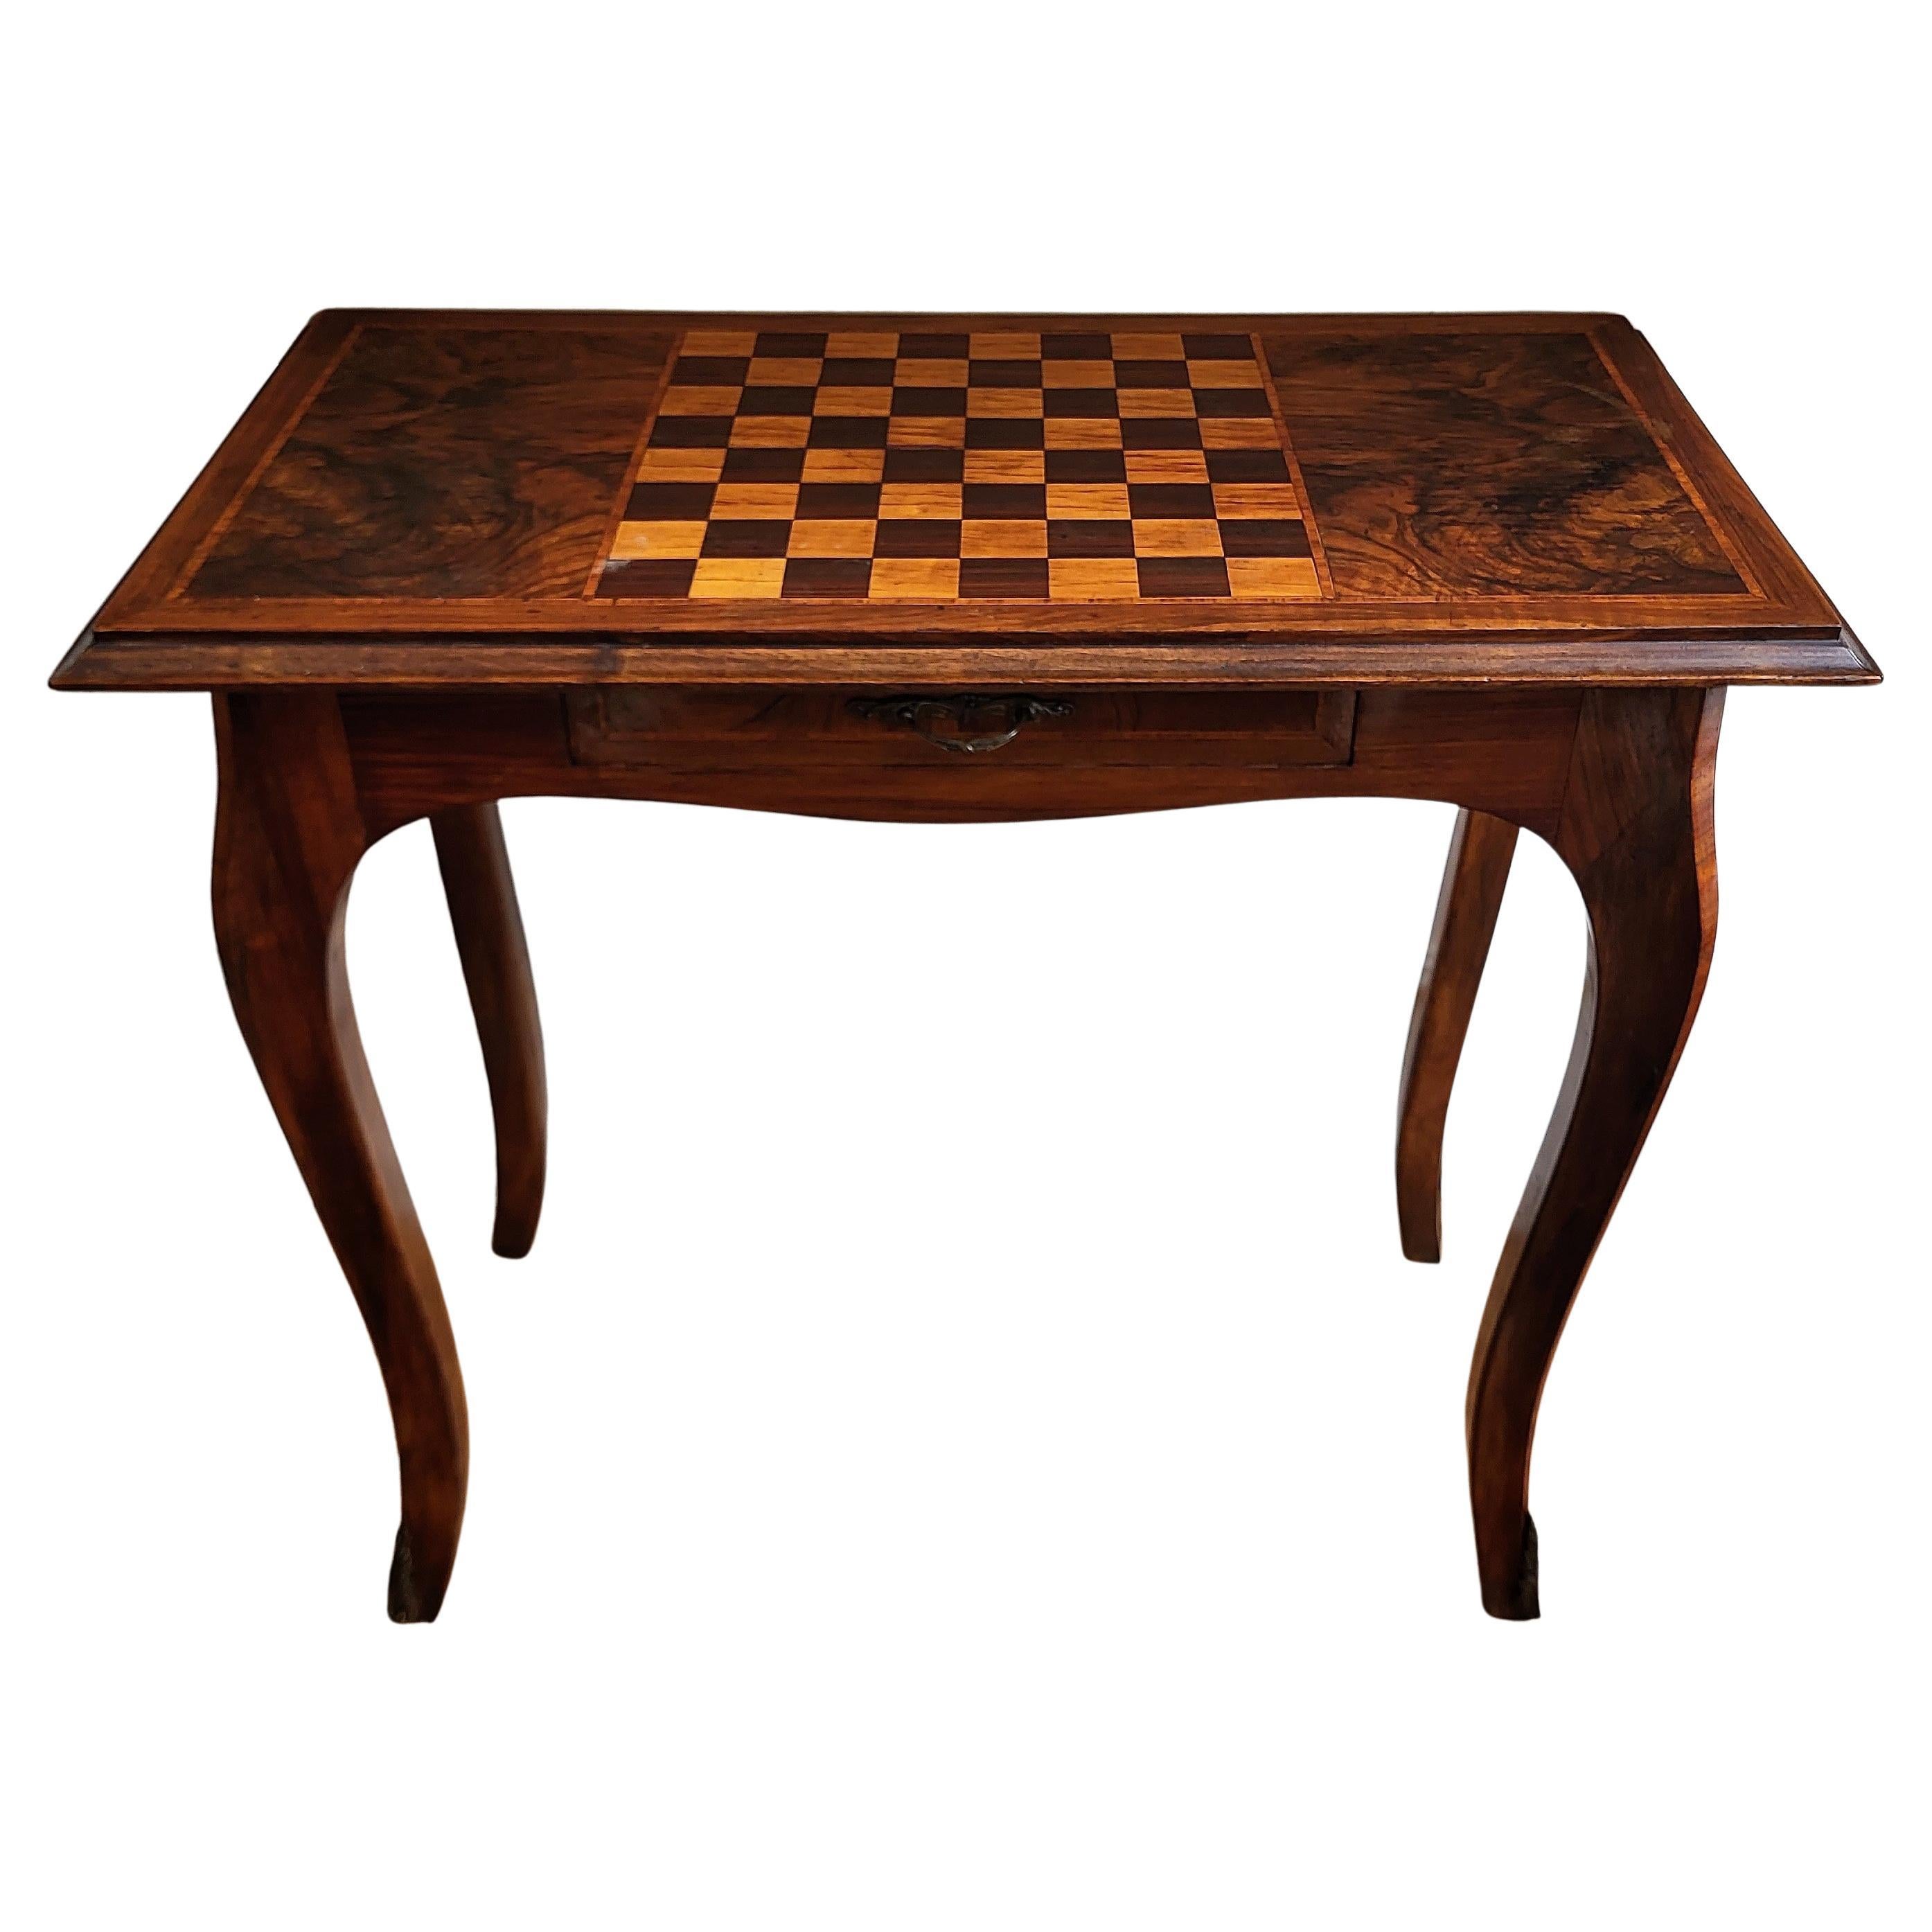 Antique Italian Walnut Burl Inlay Chess Games Side Table with Cabriole Legs For Sale